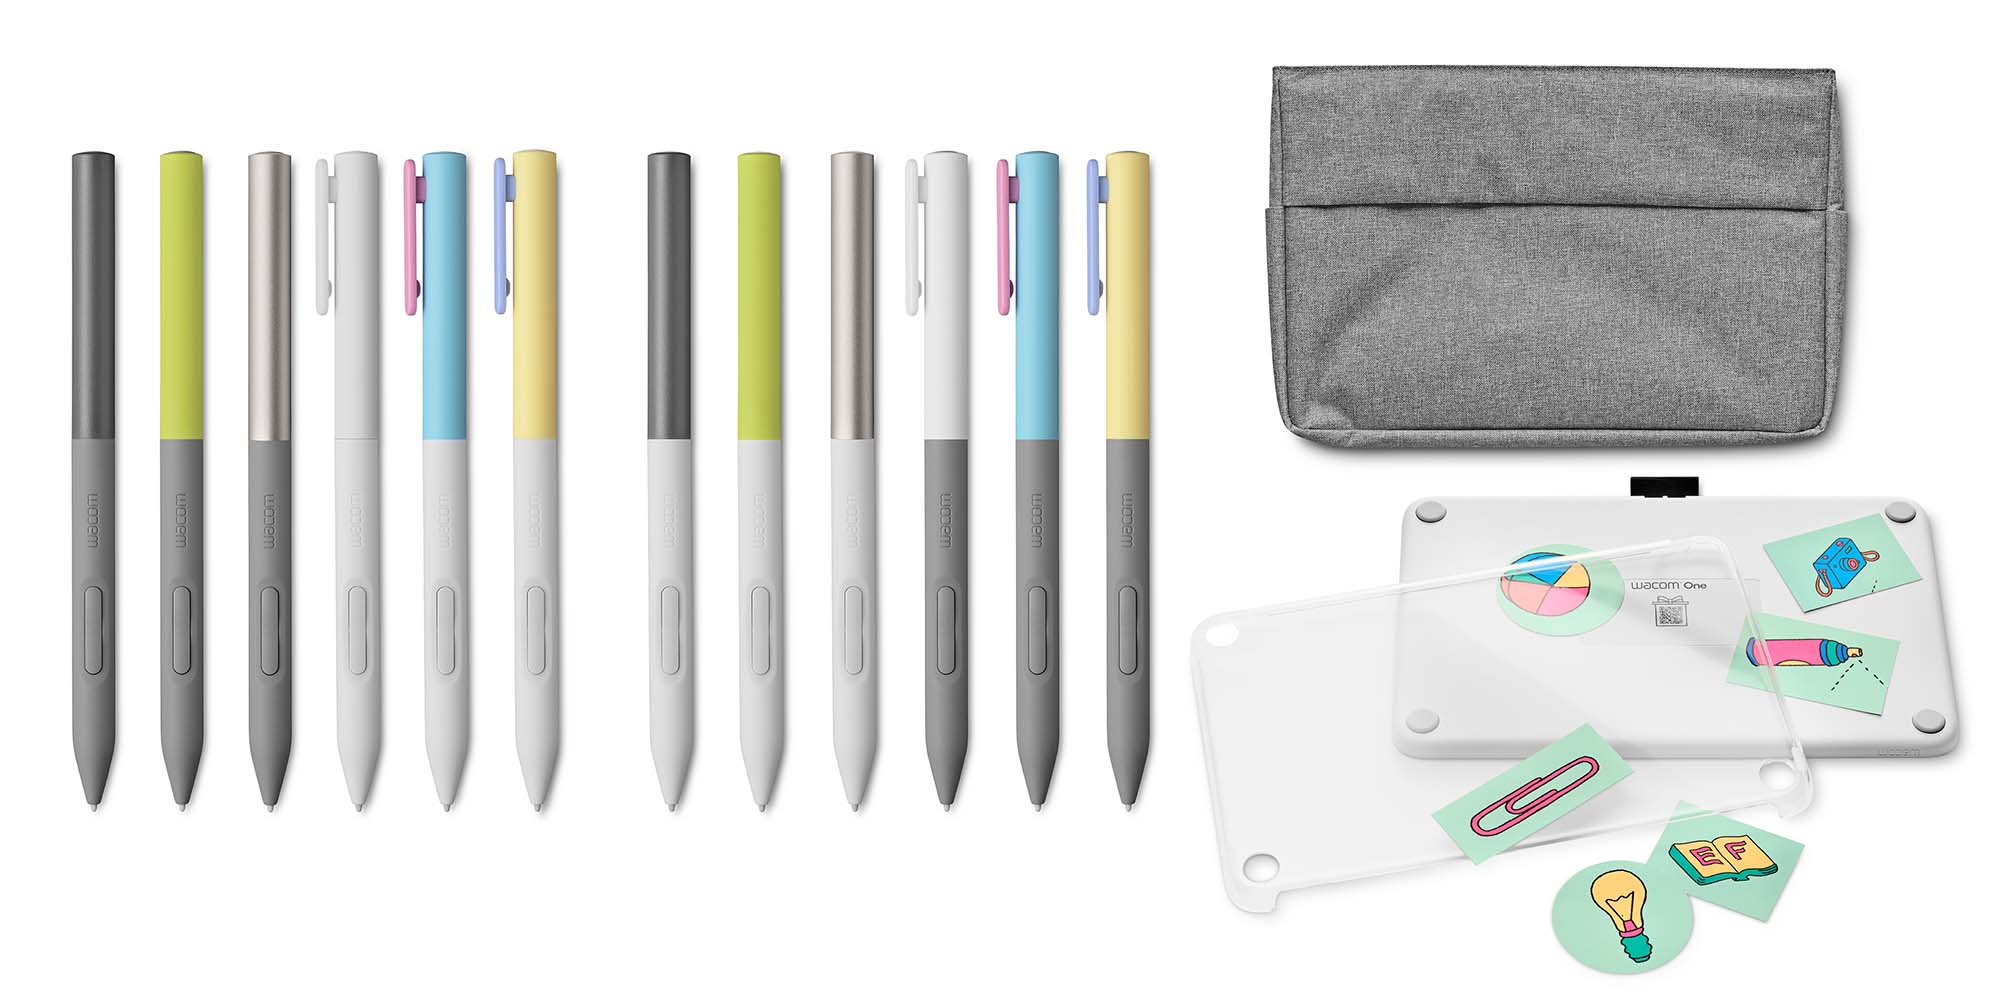 Wacom One accessories feature image